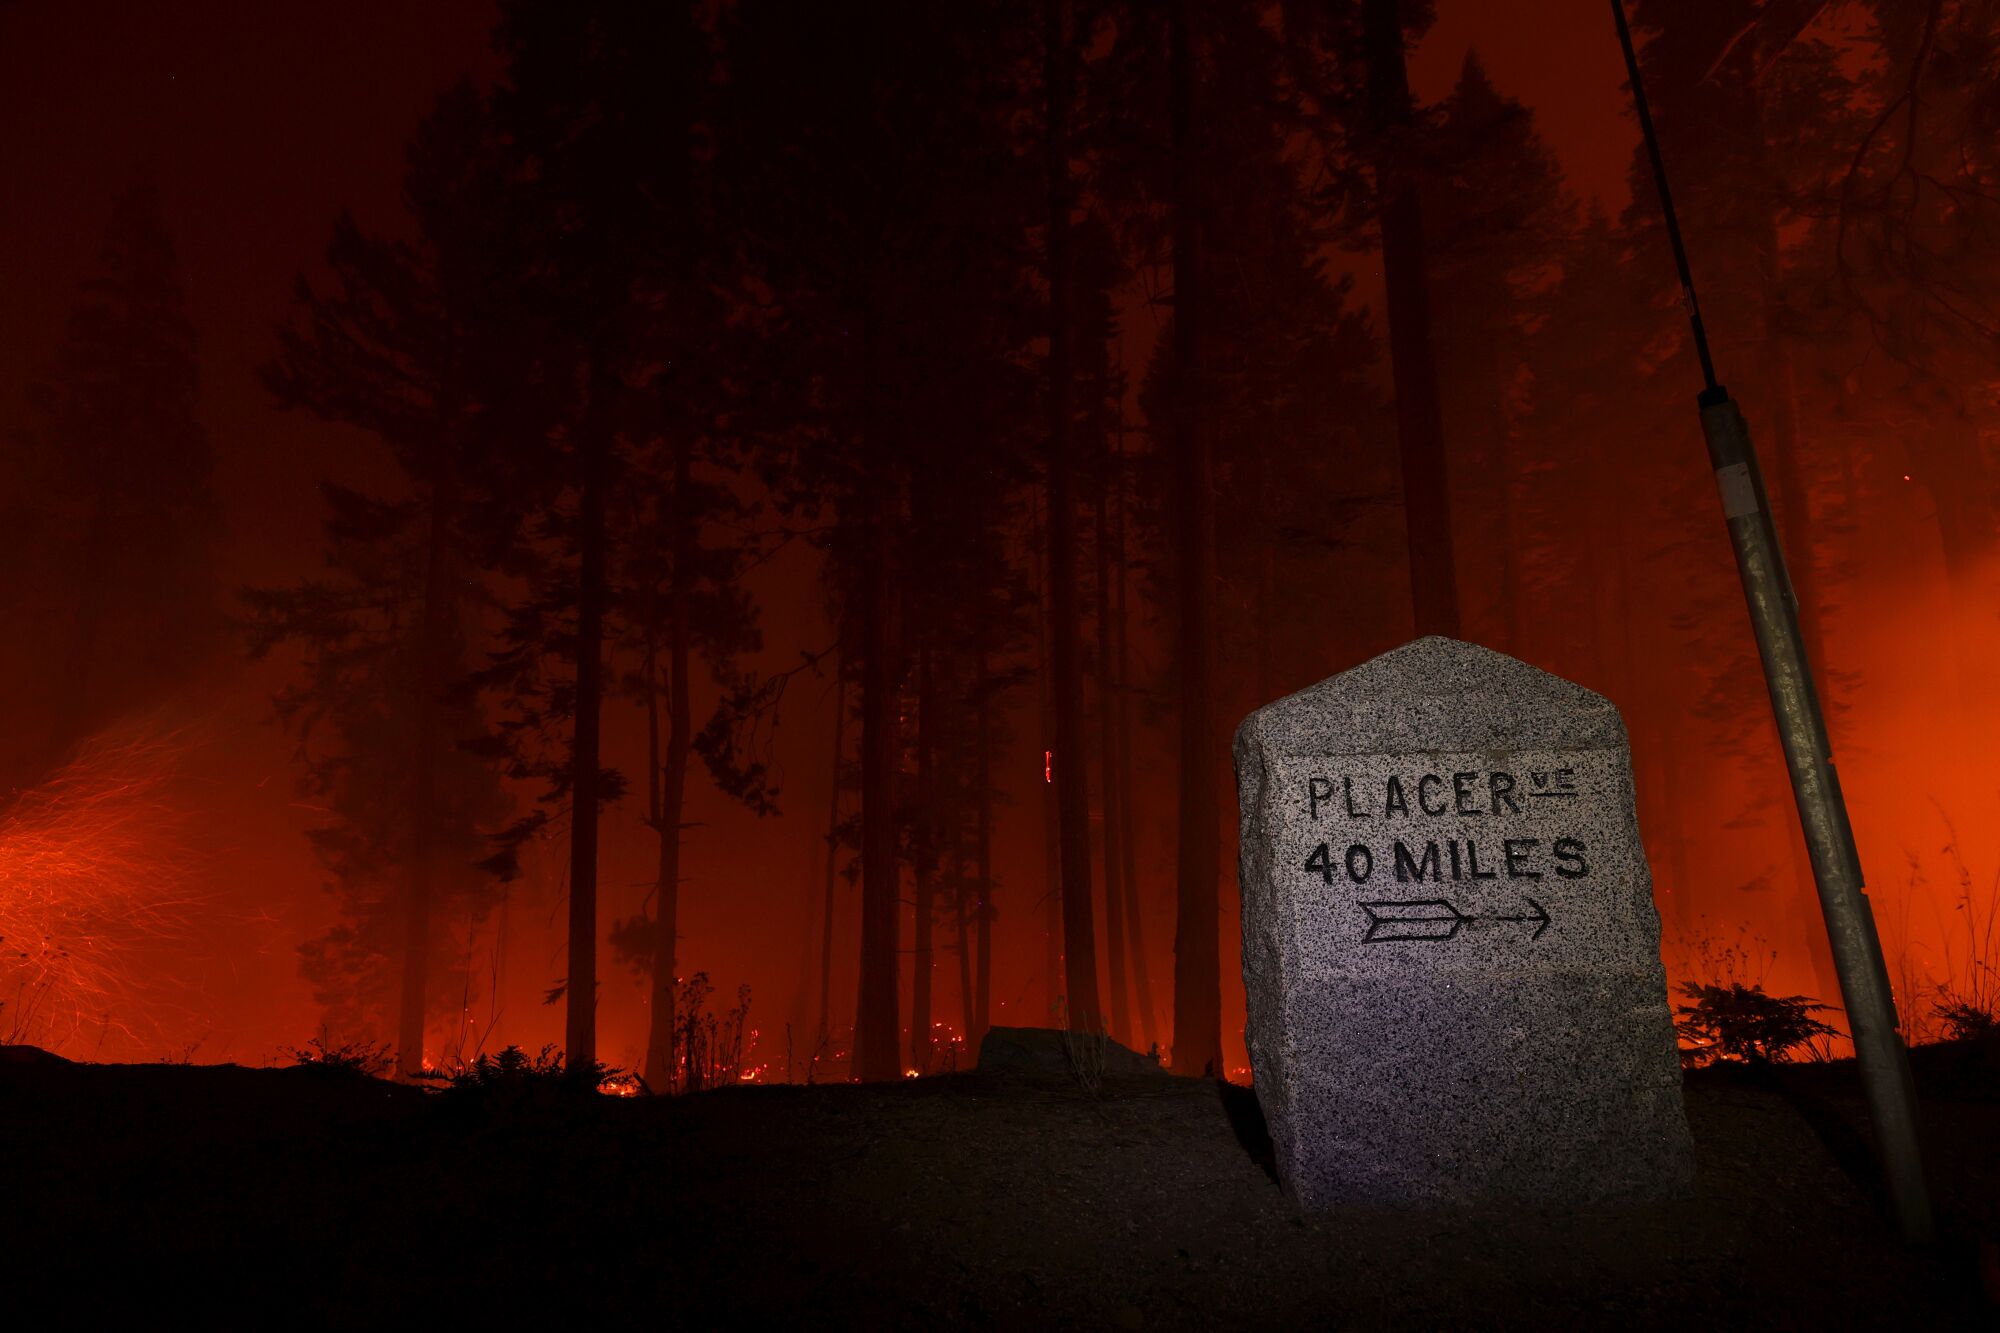 The Caldor fire glows behind a "Placerville: 40 Miles" mile marker along Highway 50.